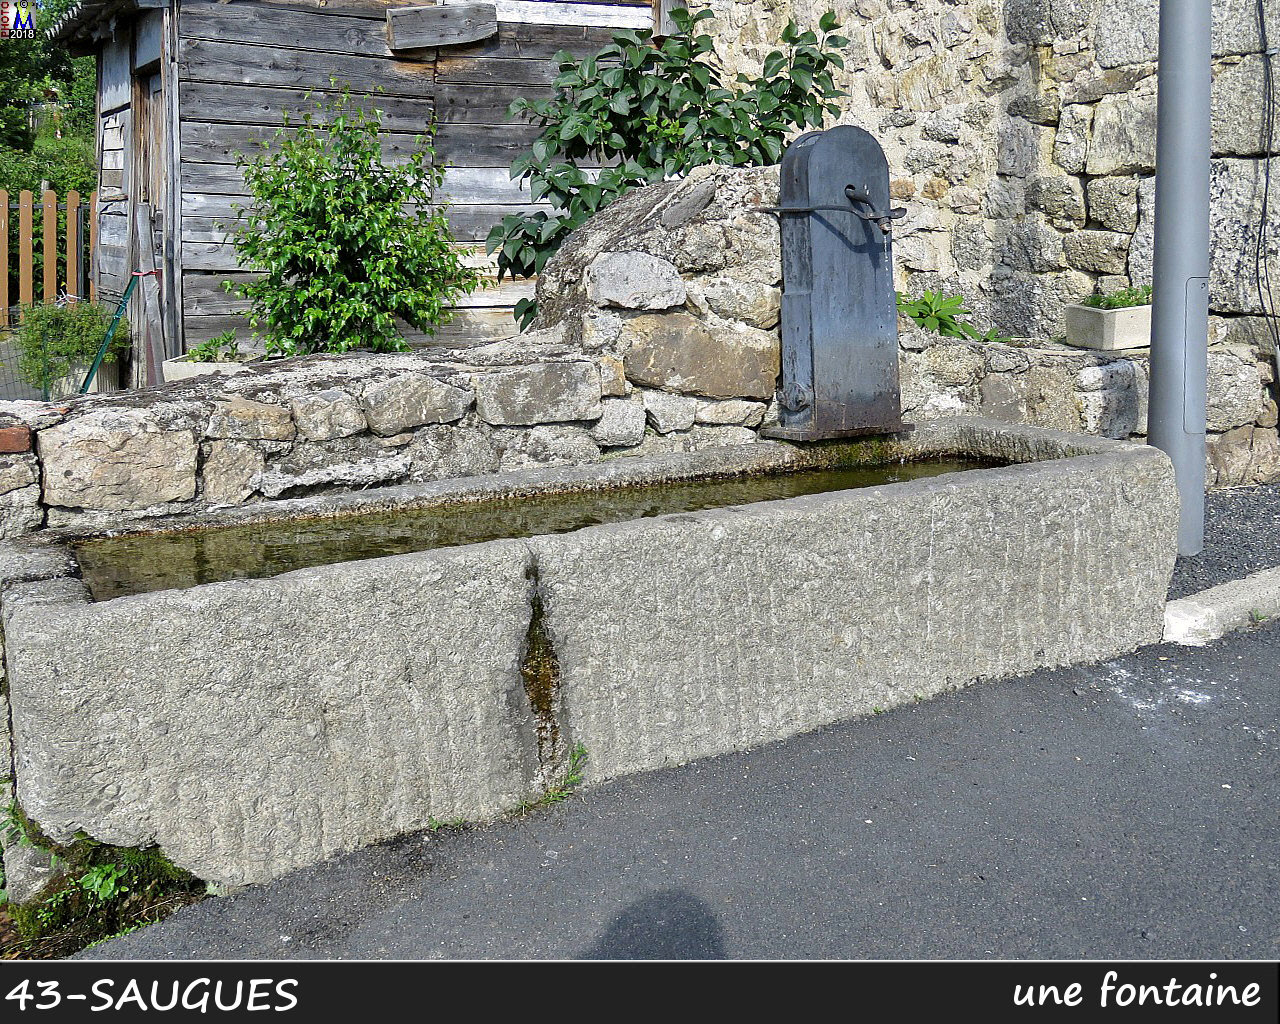 43SAUGUES_fontaine_110.jpg